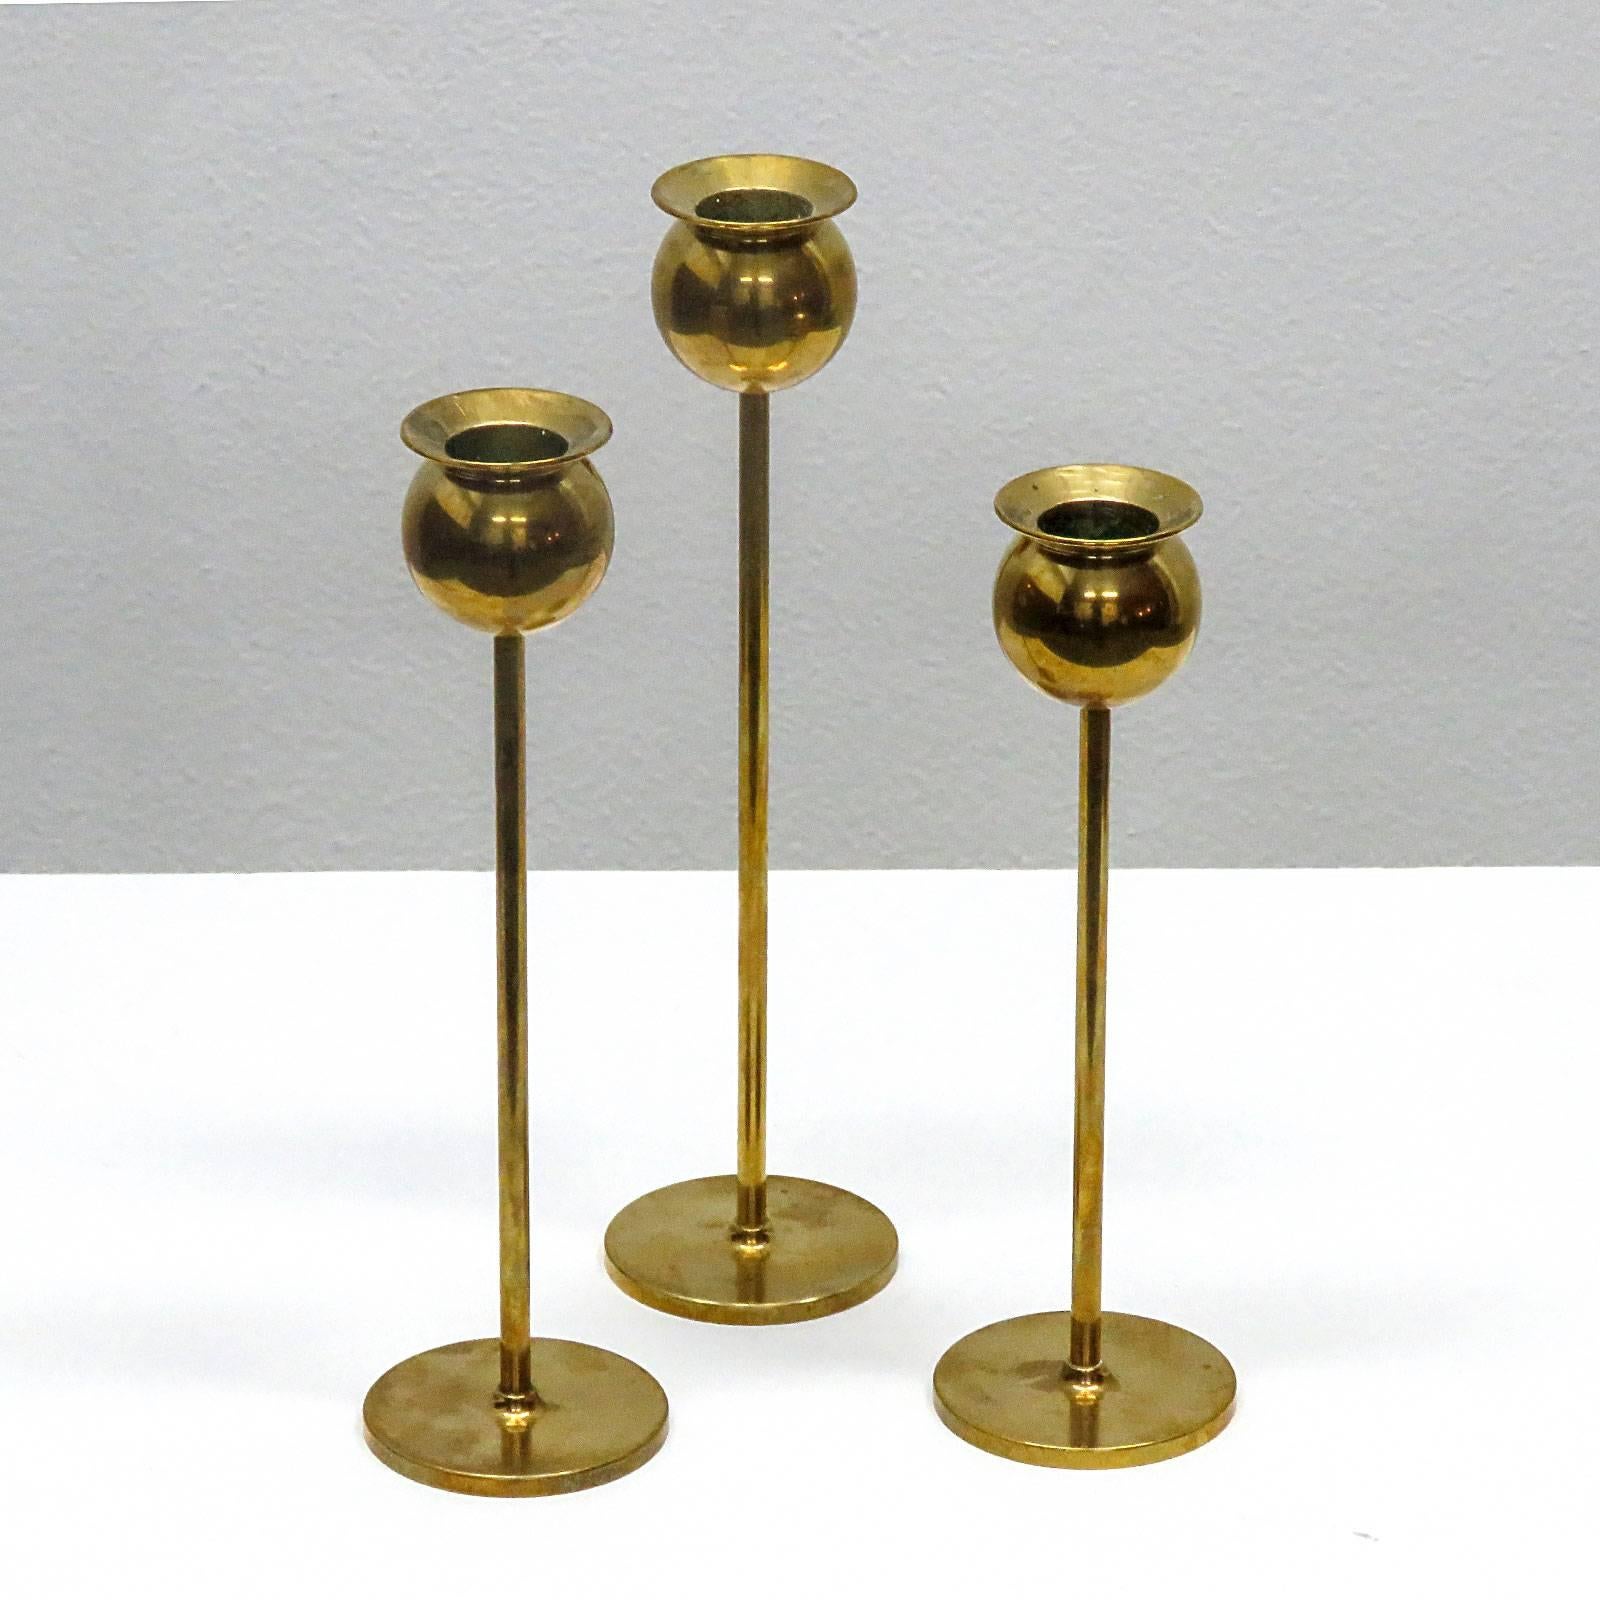 Swedish Tulip Candlesticks by Pierre Forssell for Skultuna